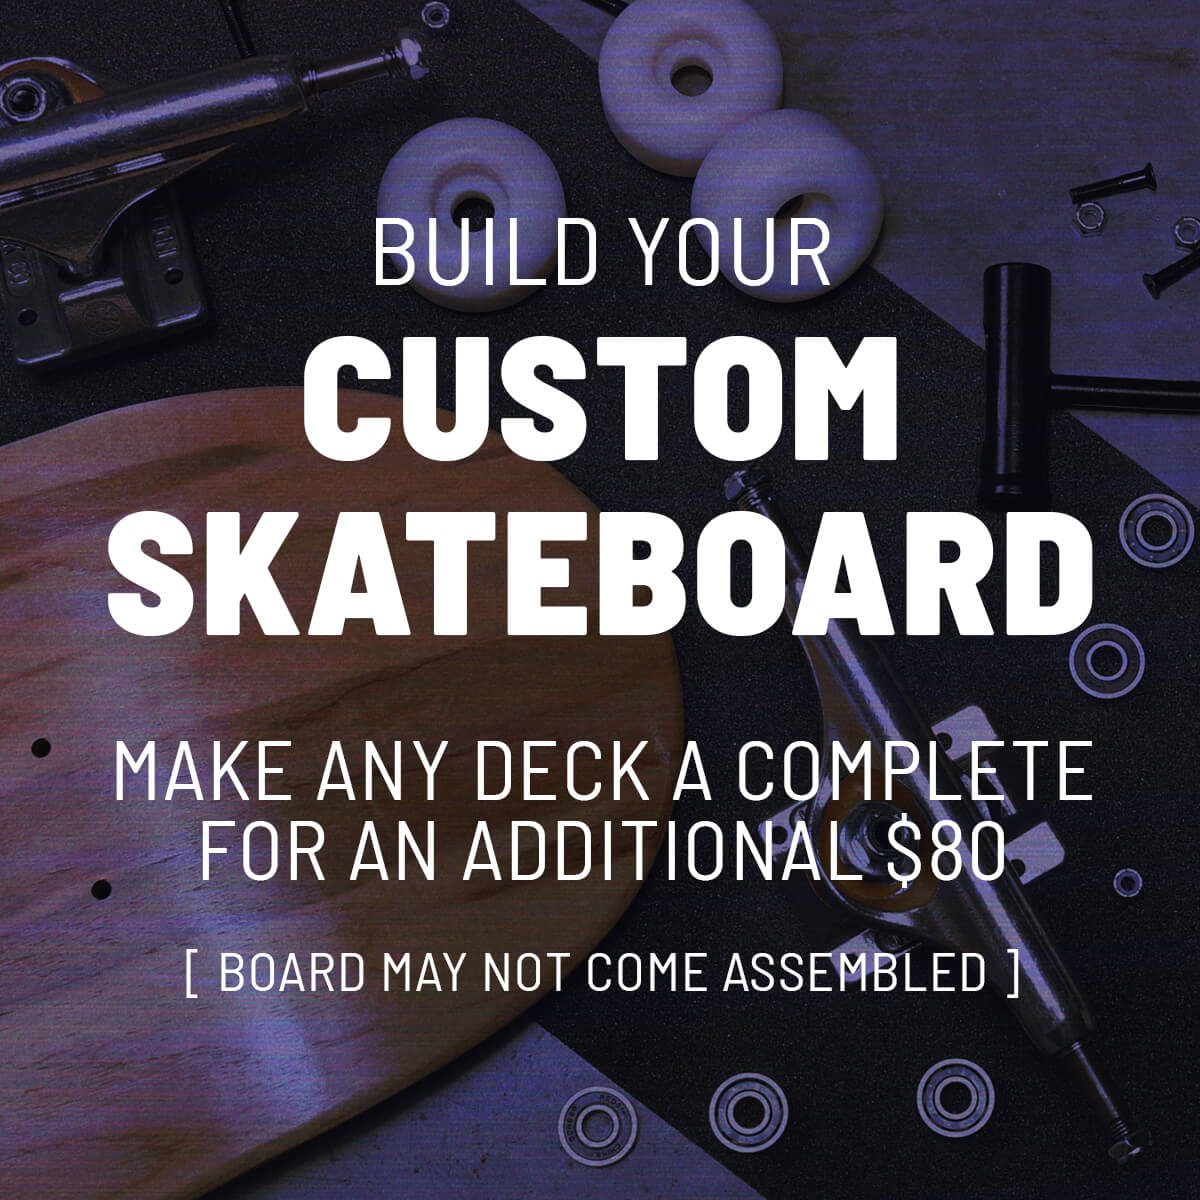 DESIGN YOUR OWN SKATEBOARD AND SAVE